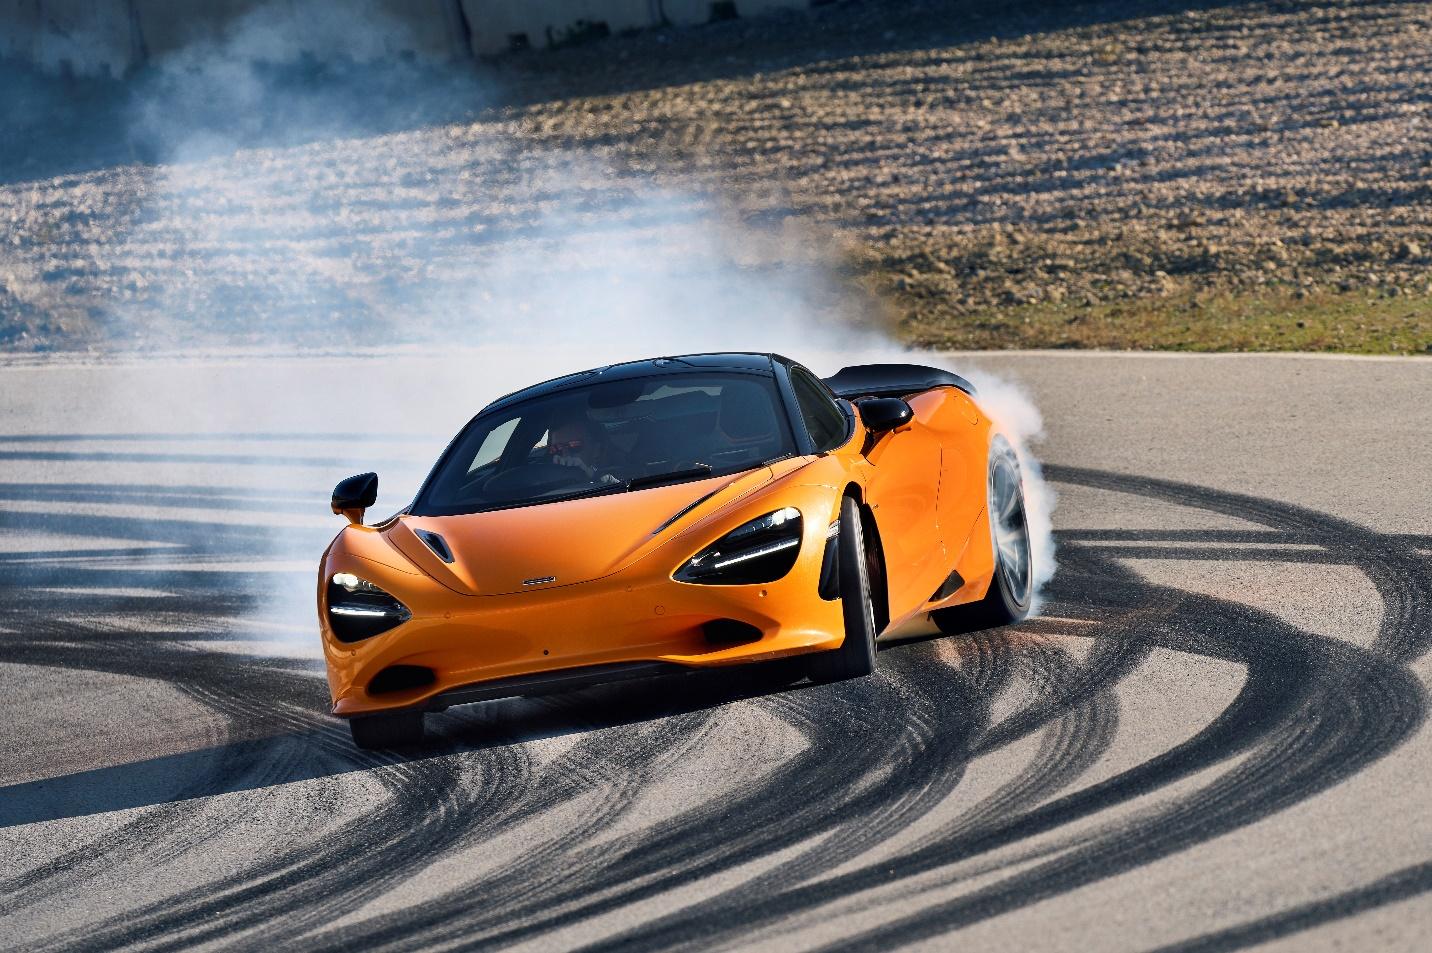 A orange sports car on a road with smoke coming out of it

Description automatically generated